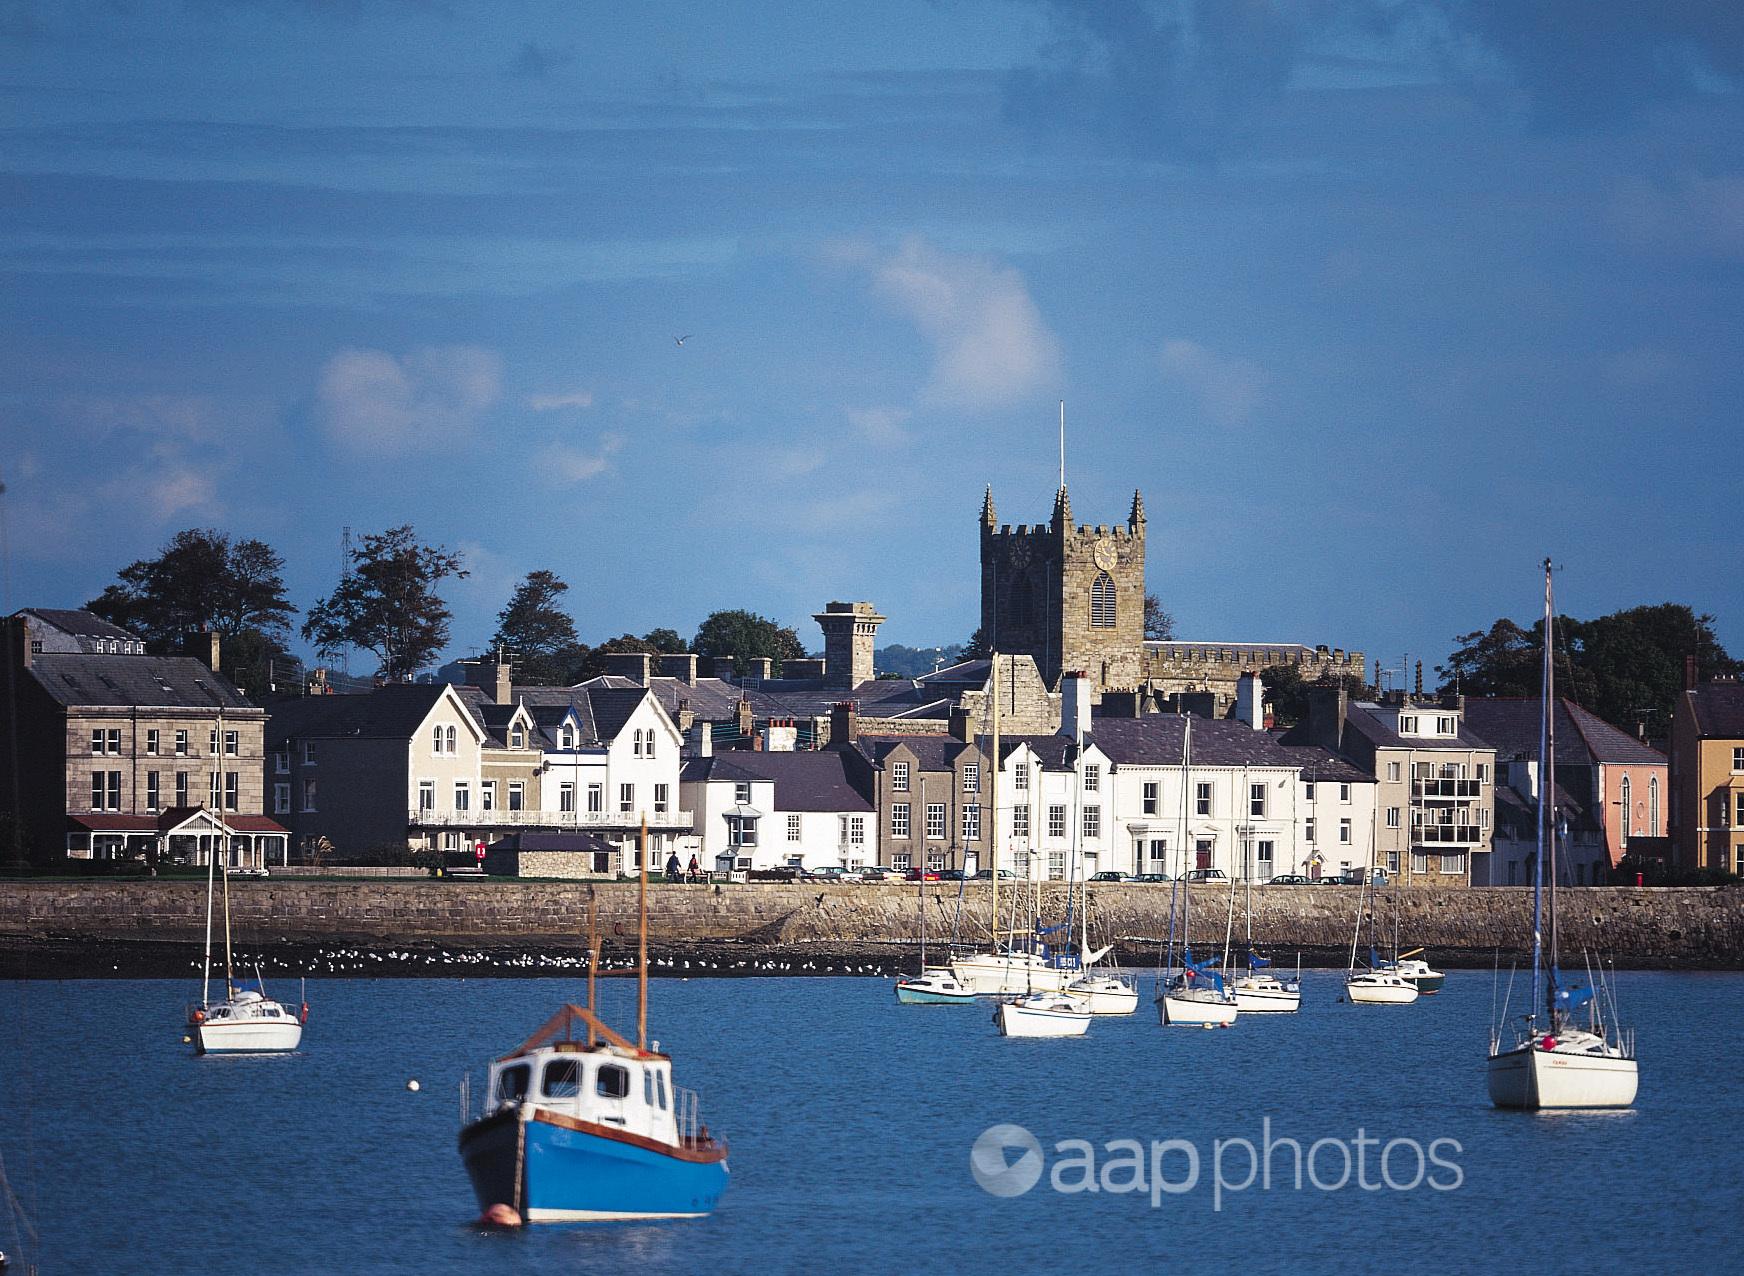 The waterfront of Beaumaris on the island of Anglesey.